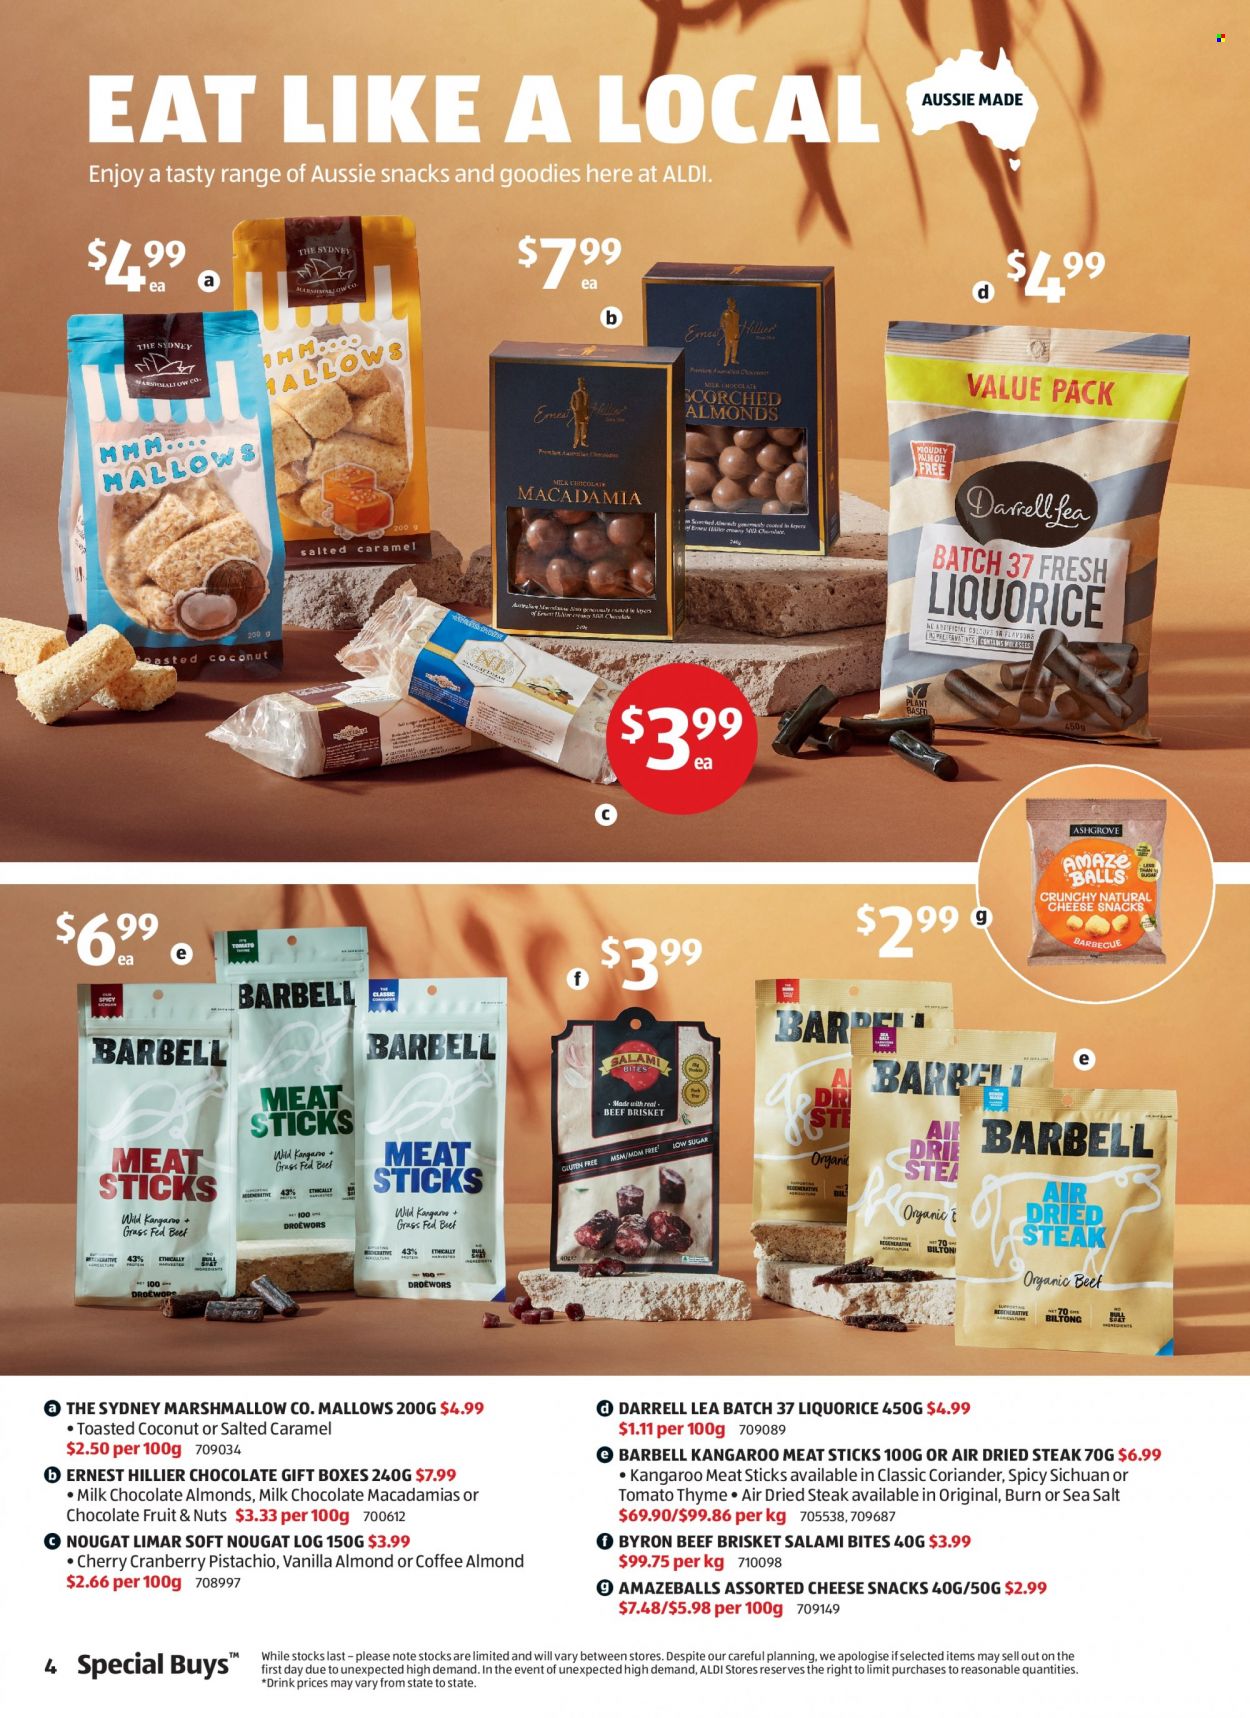 ALDI Catalogue - 12 May 2022 - 18 May 2022 - Sales products - cherries, salami, cheese, milk chocolate, chocolate, snack, nougat, marshmallows, chocolate almonds, coriander, coffee, beef meat, steak, beef brisket, Aussie, gift box. Page 4.